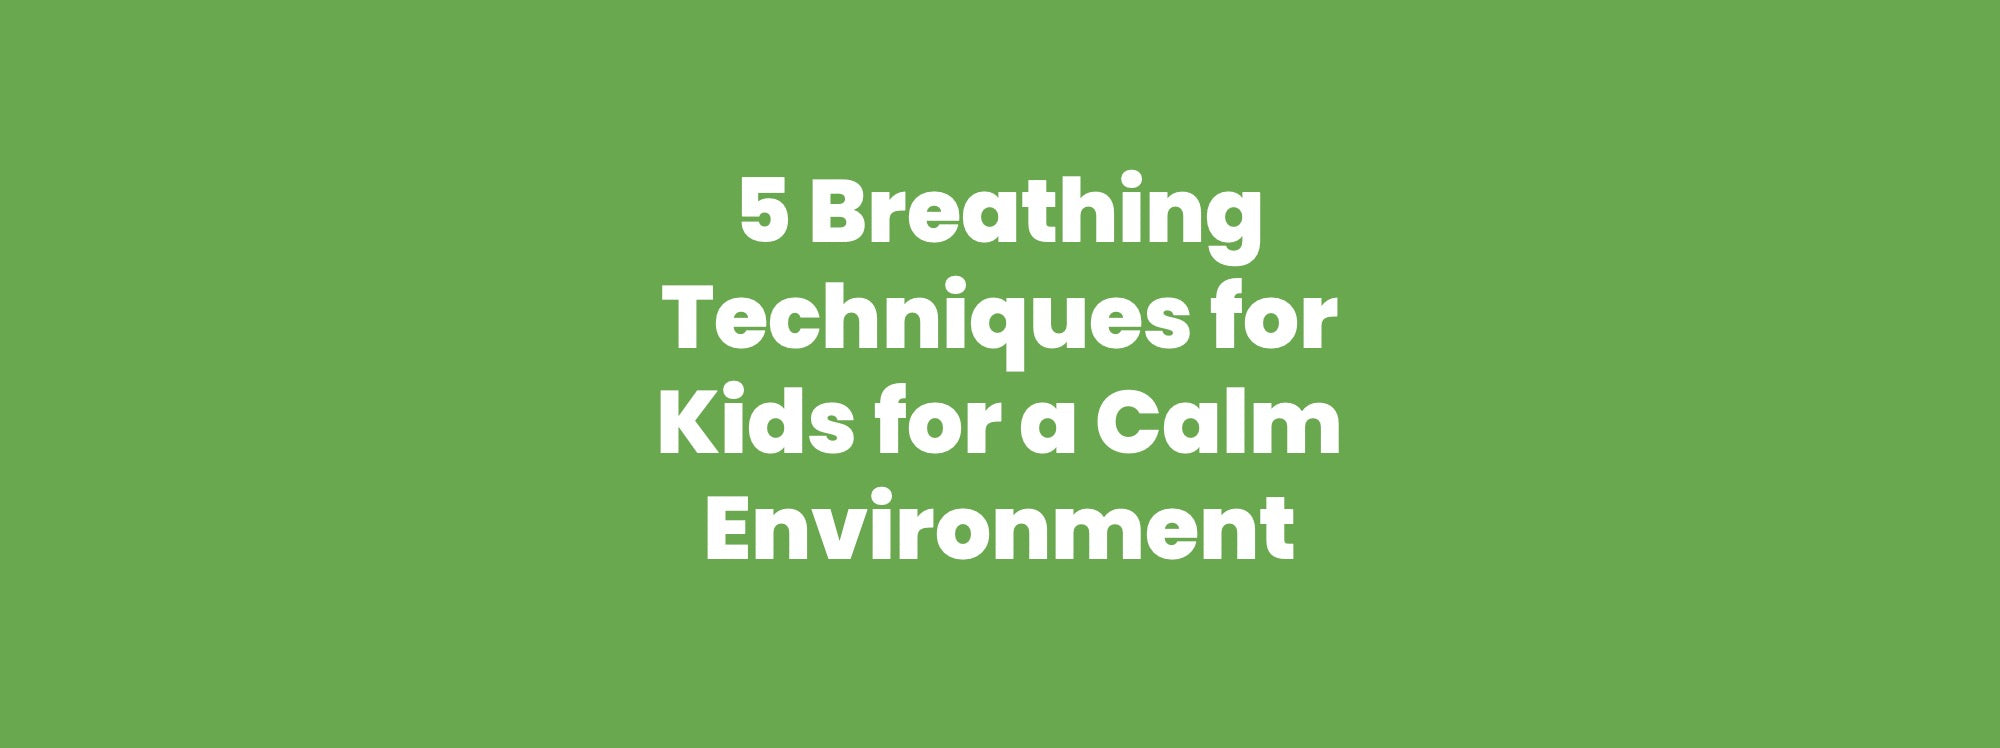 5 Breathing Techniques for Kids for a Calm Environment